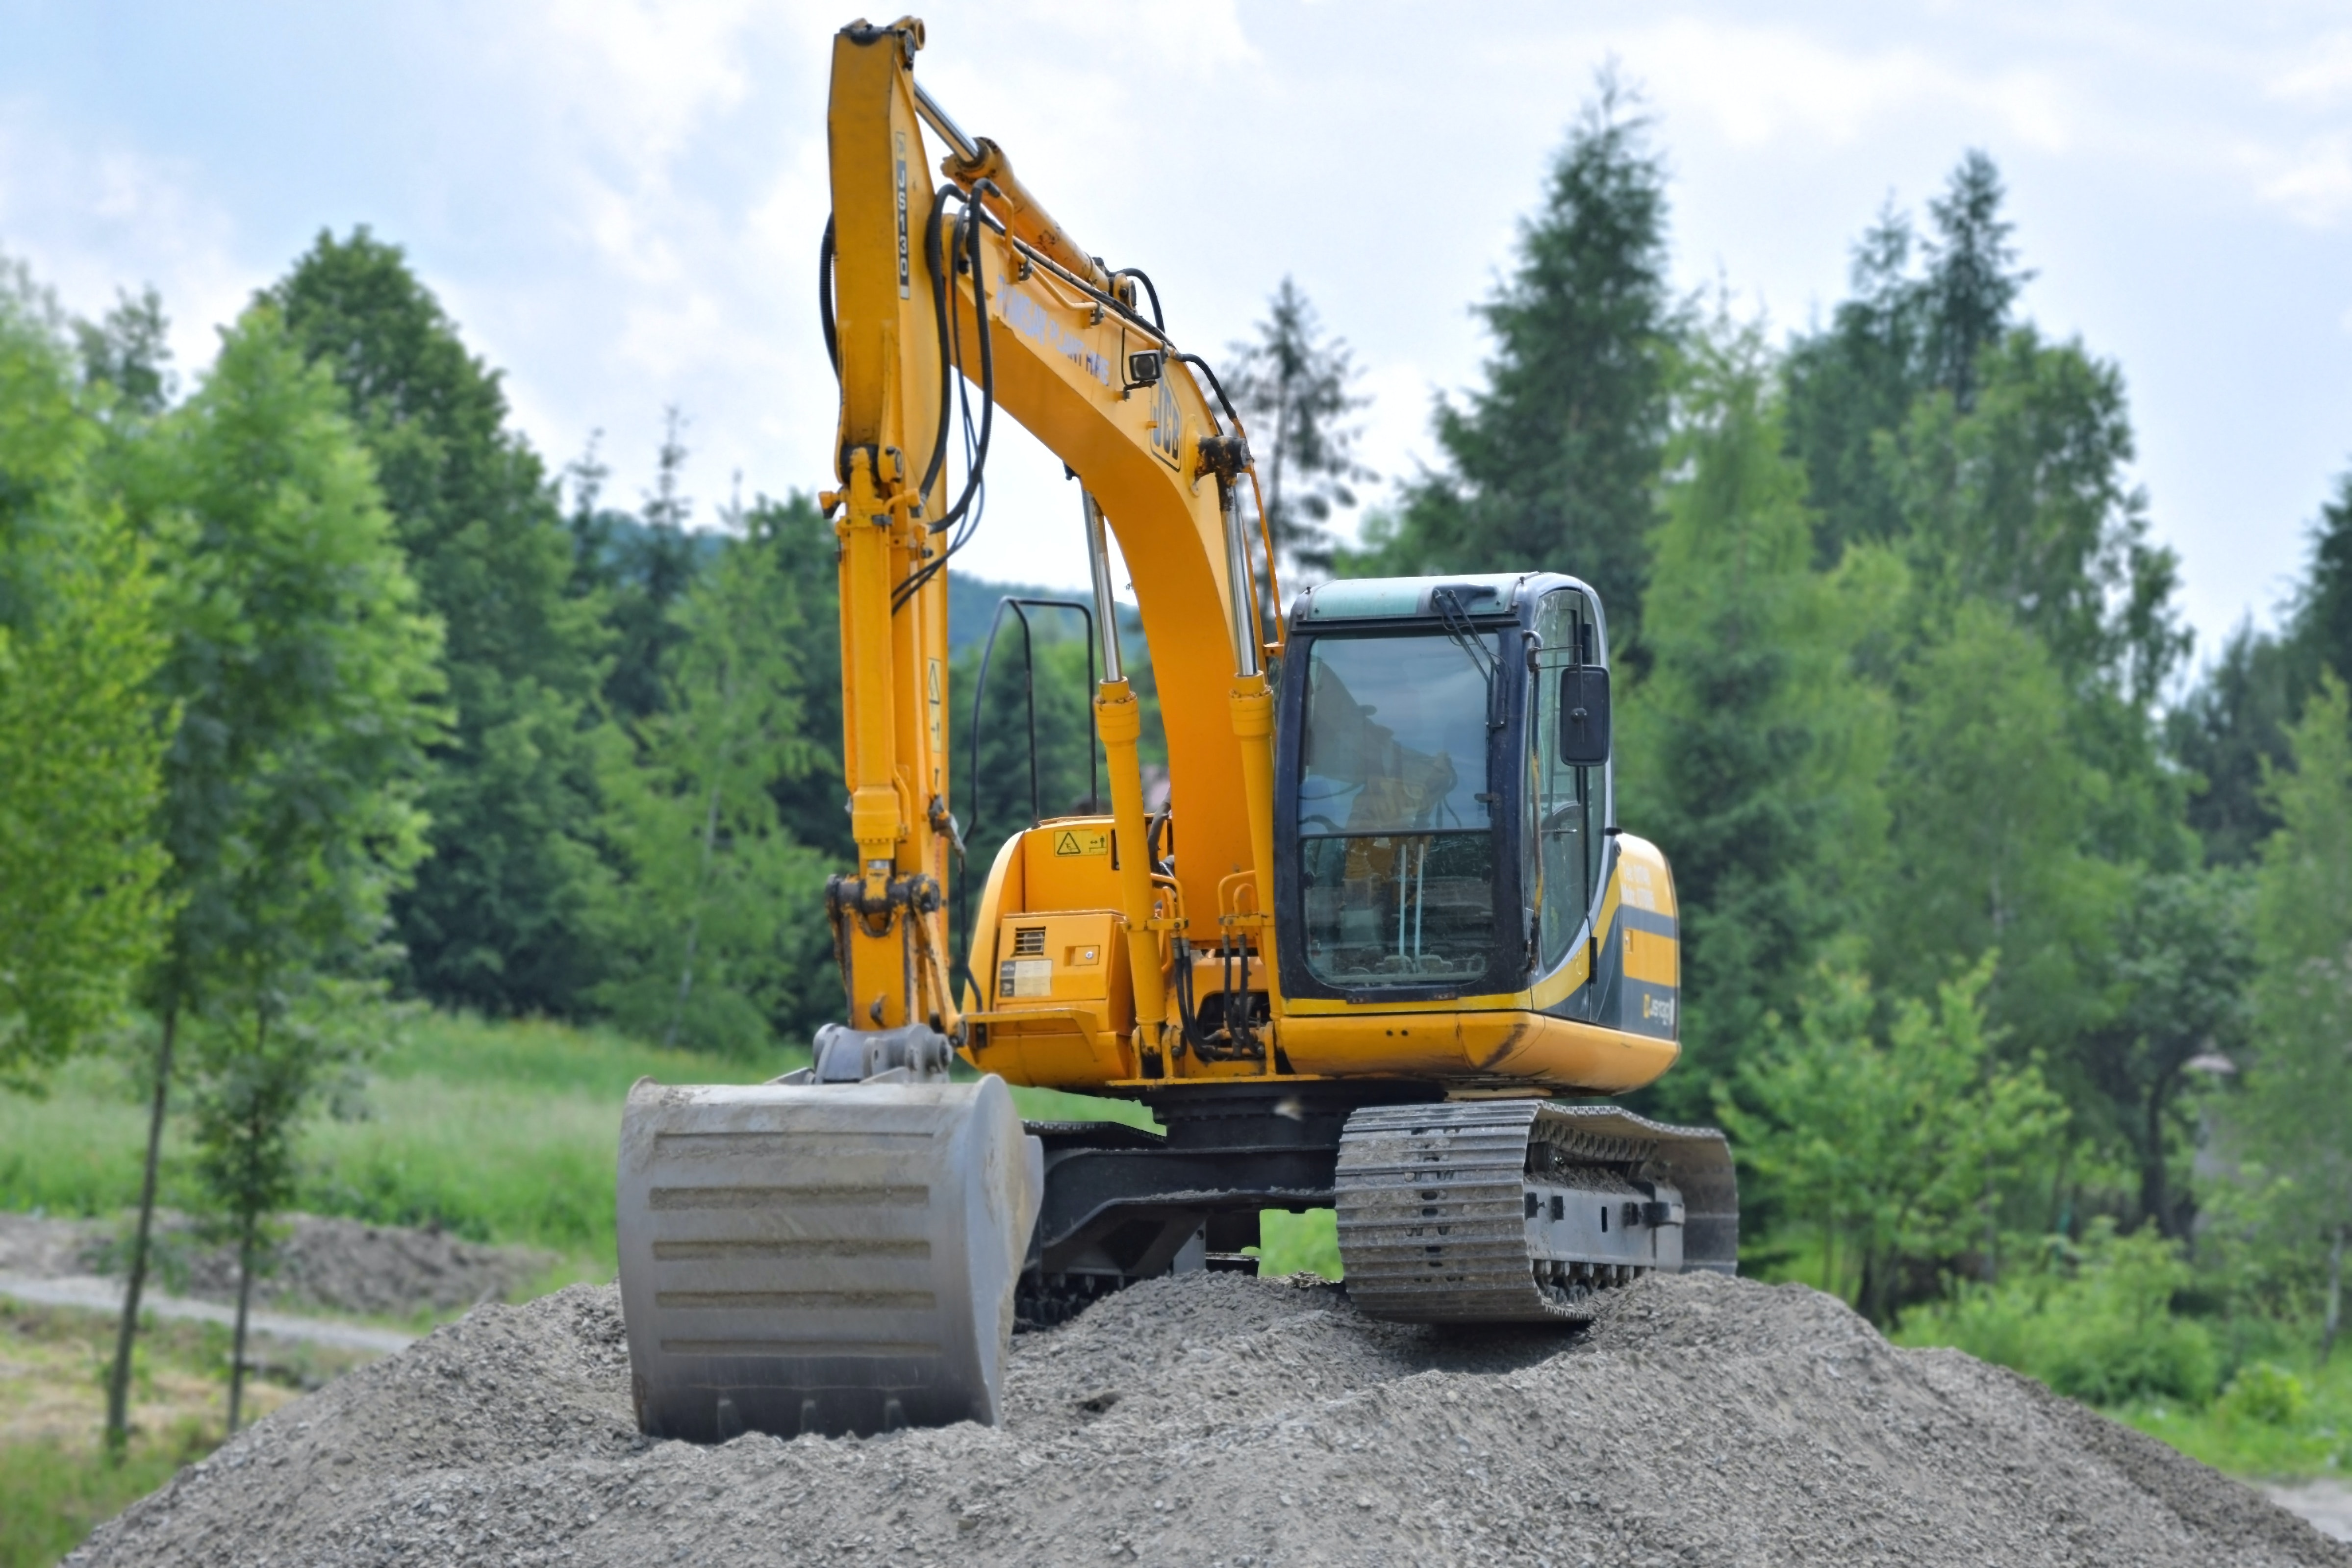 Construction Equipment Financing for Your Business